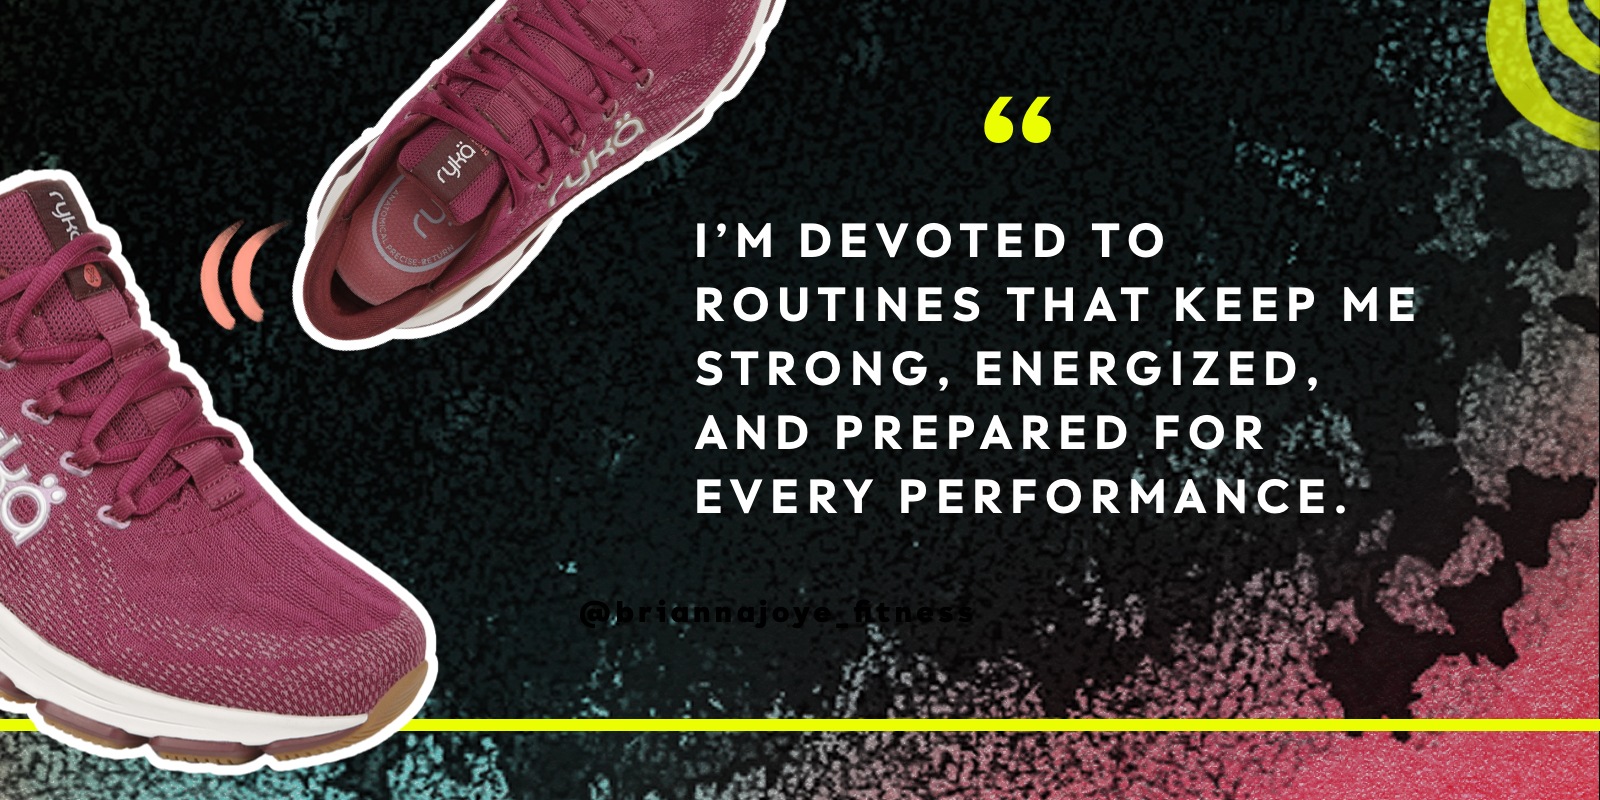 sara adams quote - I’m devoted to  routines that keep me strong, energized,  and prepared for  every performance.